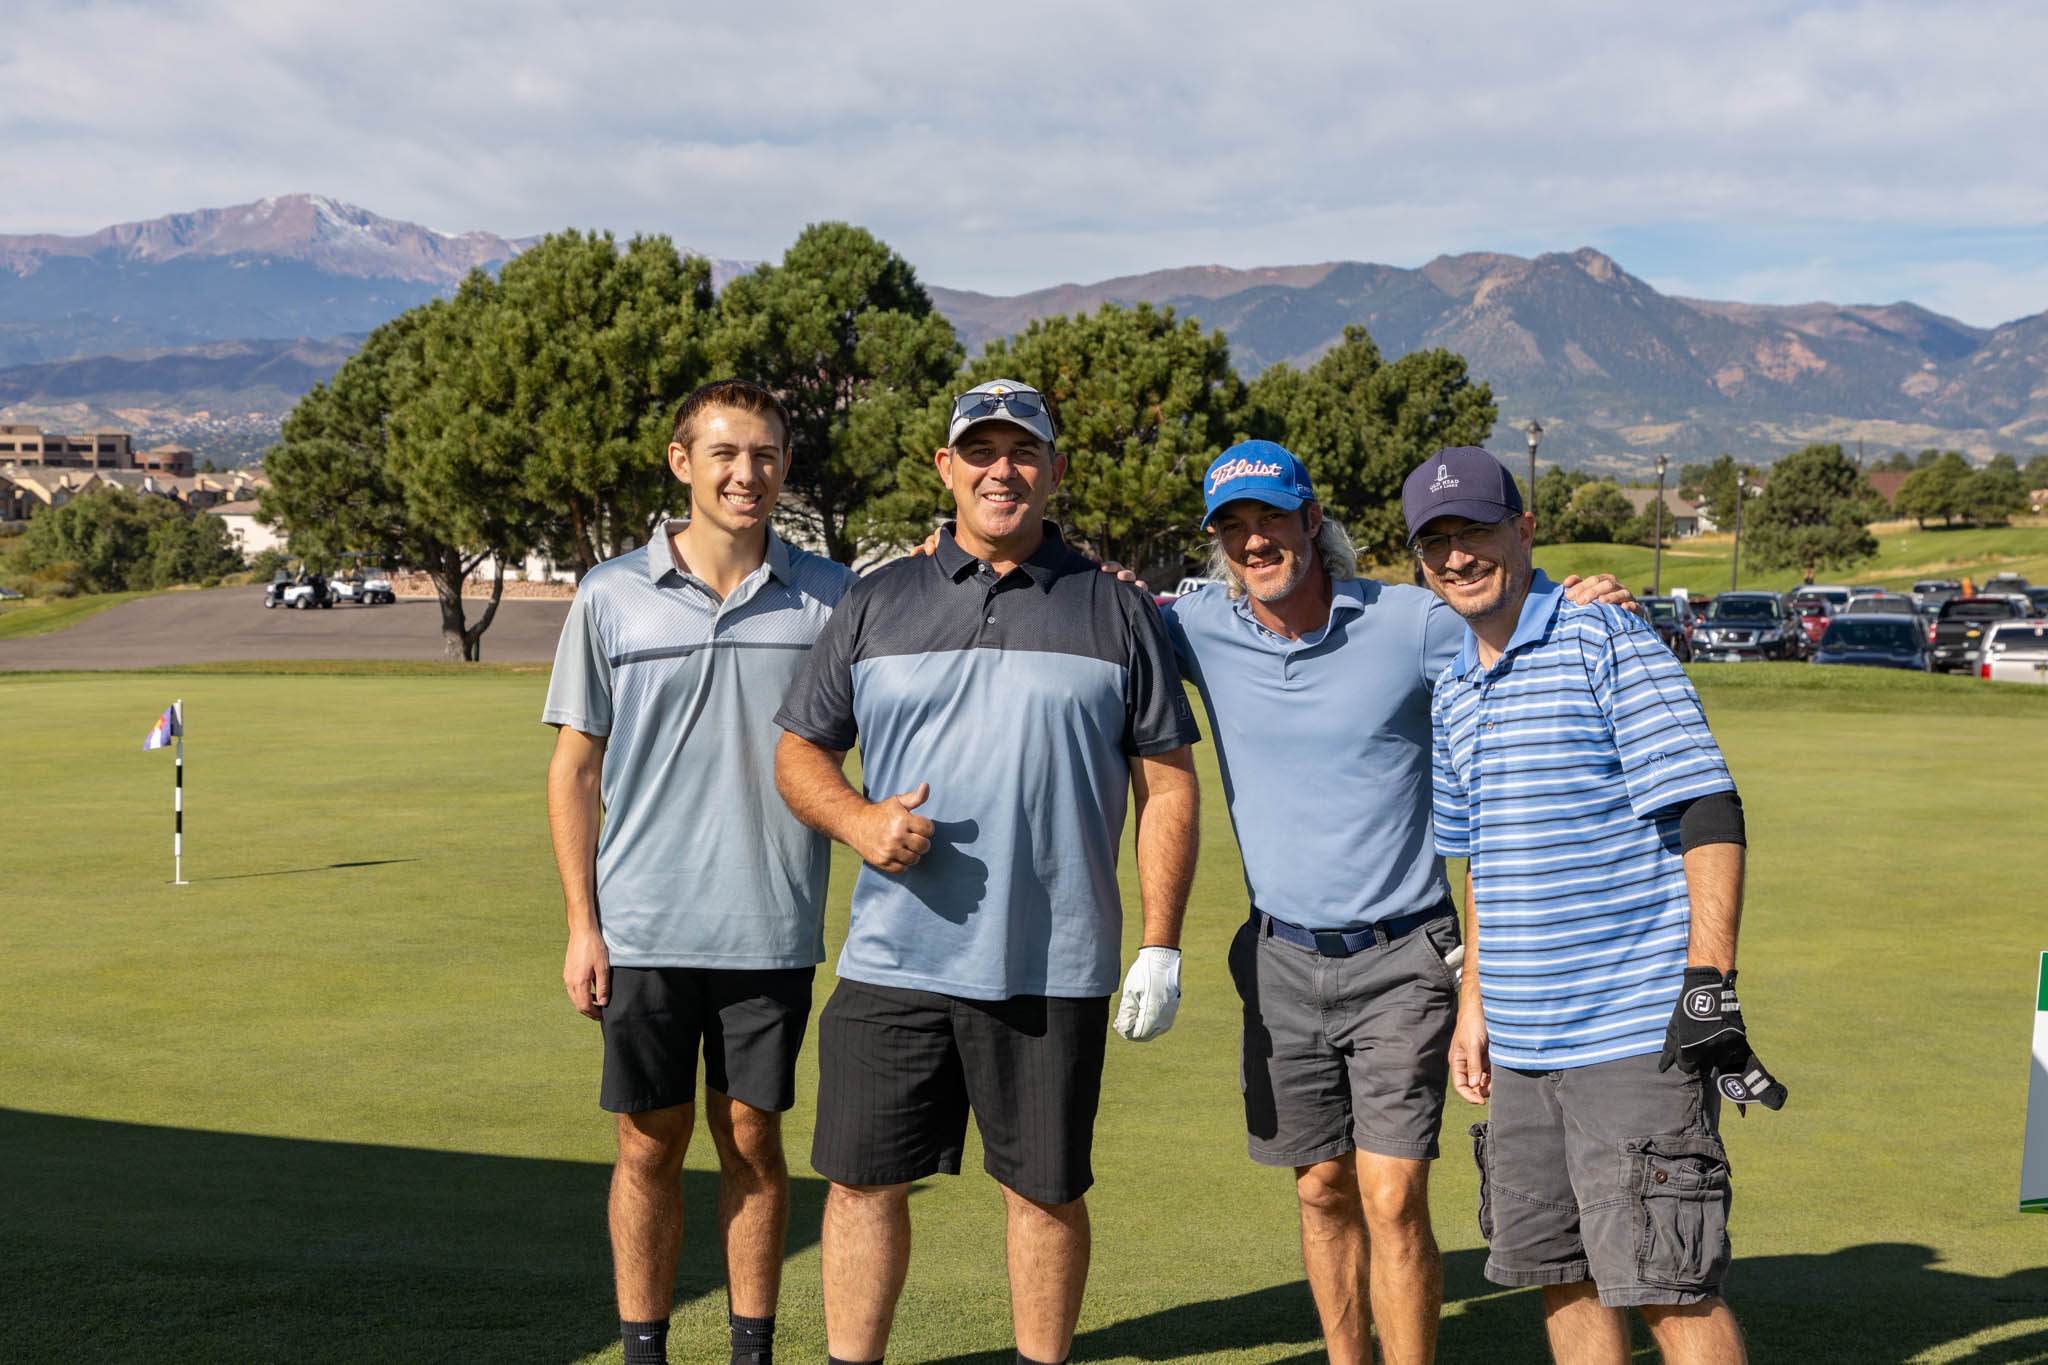 Steve Fisher, Garrett Fisher and two men posing for a photo on a golf course at Heartland Connect Golf Tournament at Pine Creek Golf Club in Colorado Springs